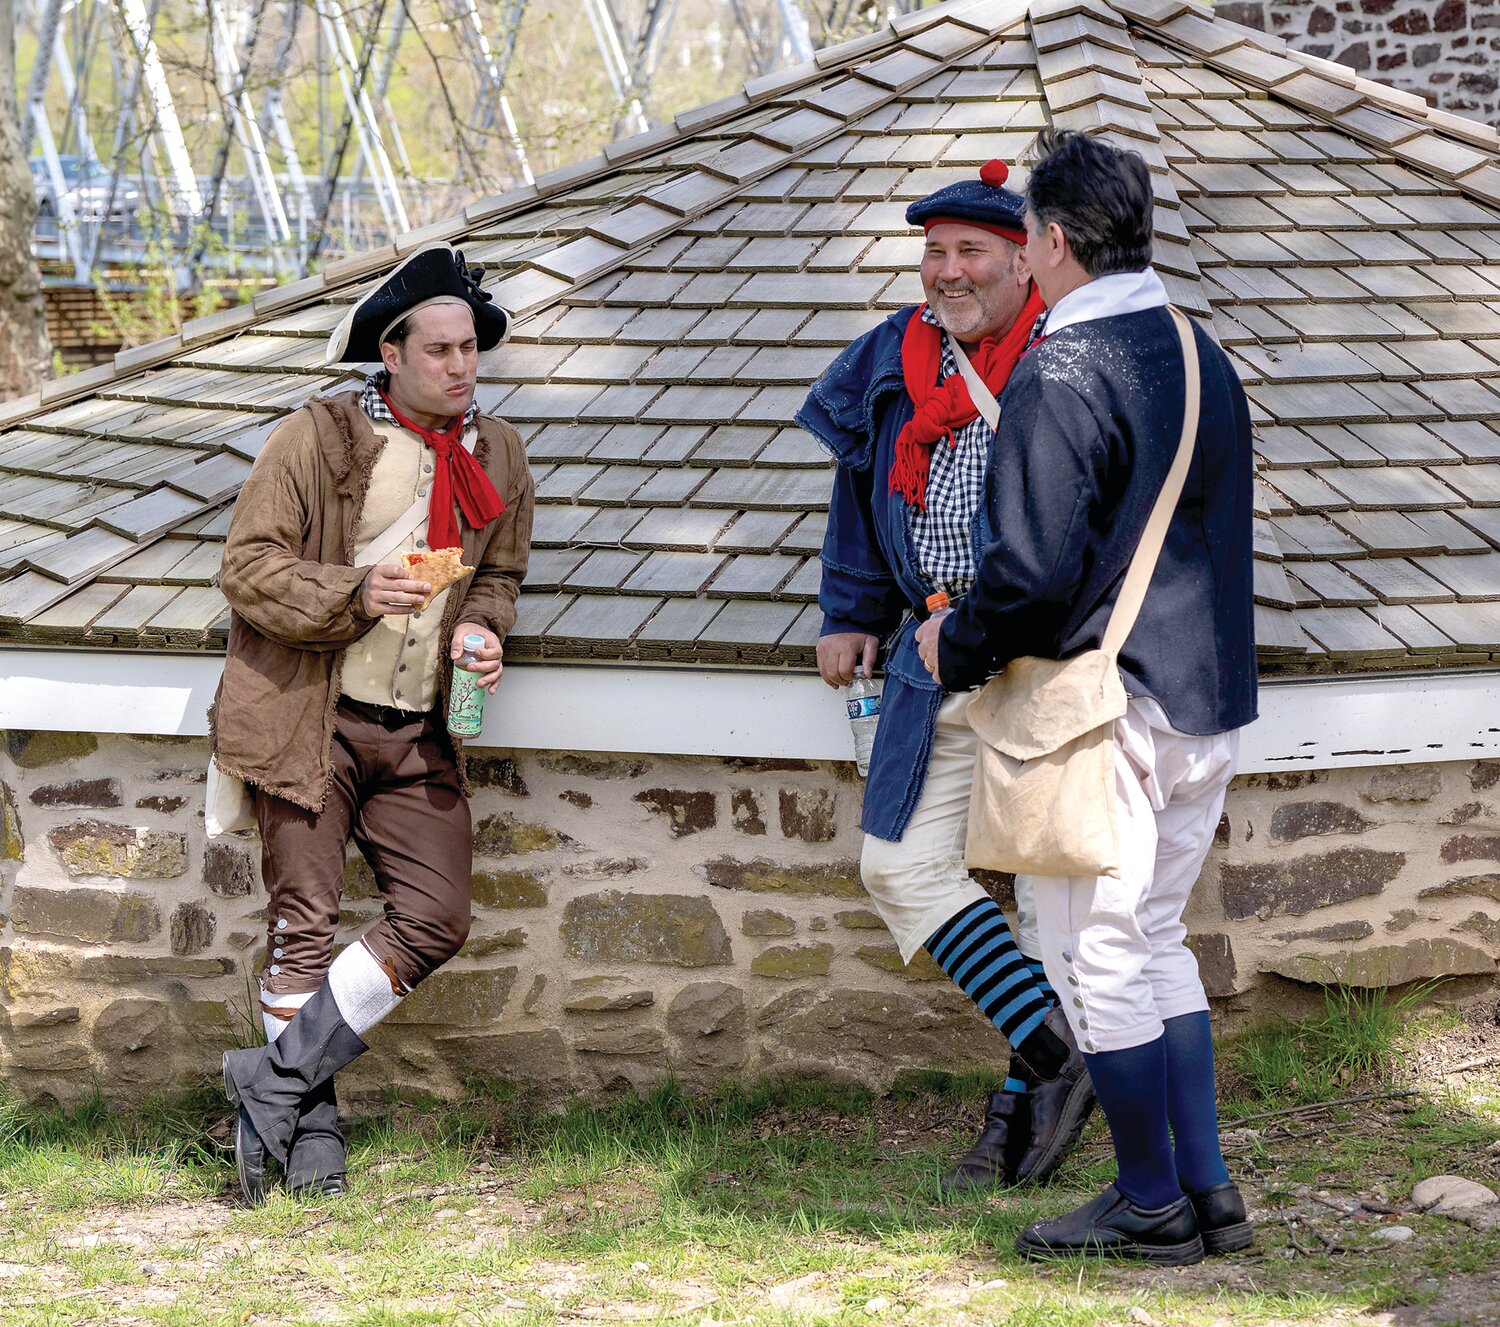 A reenactor has some pizza and an Arizona iced tea during a break in the filming at Washington Crossing Historic Park.